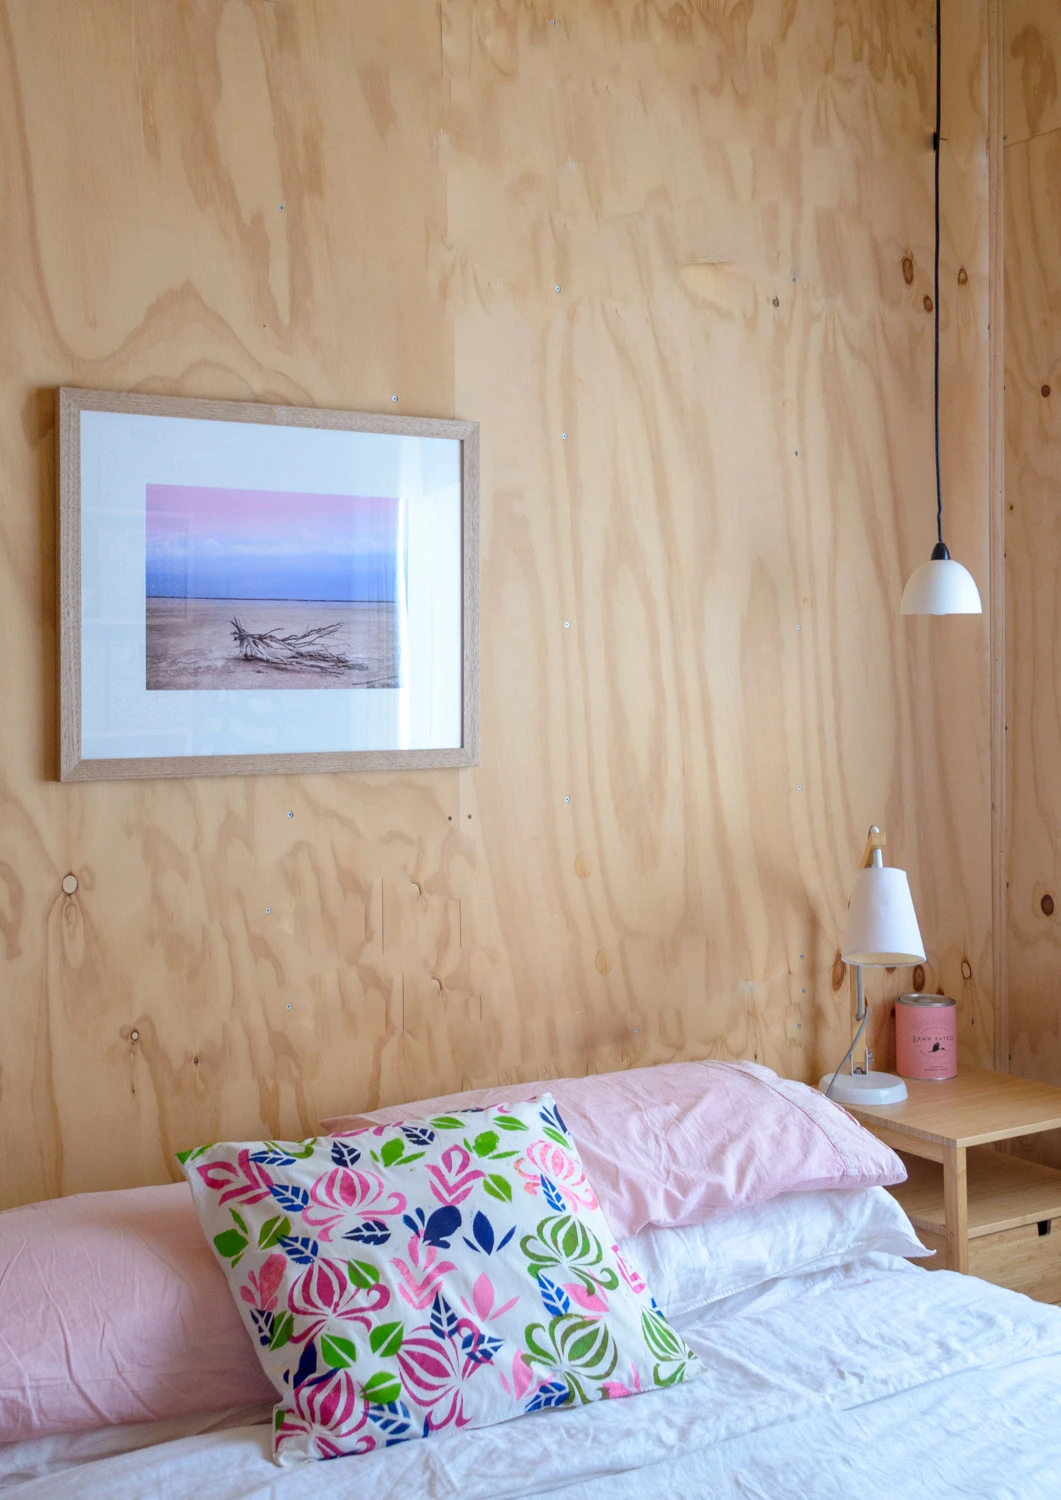 A pink bedroom with wooden walls